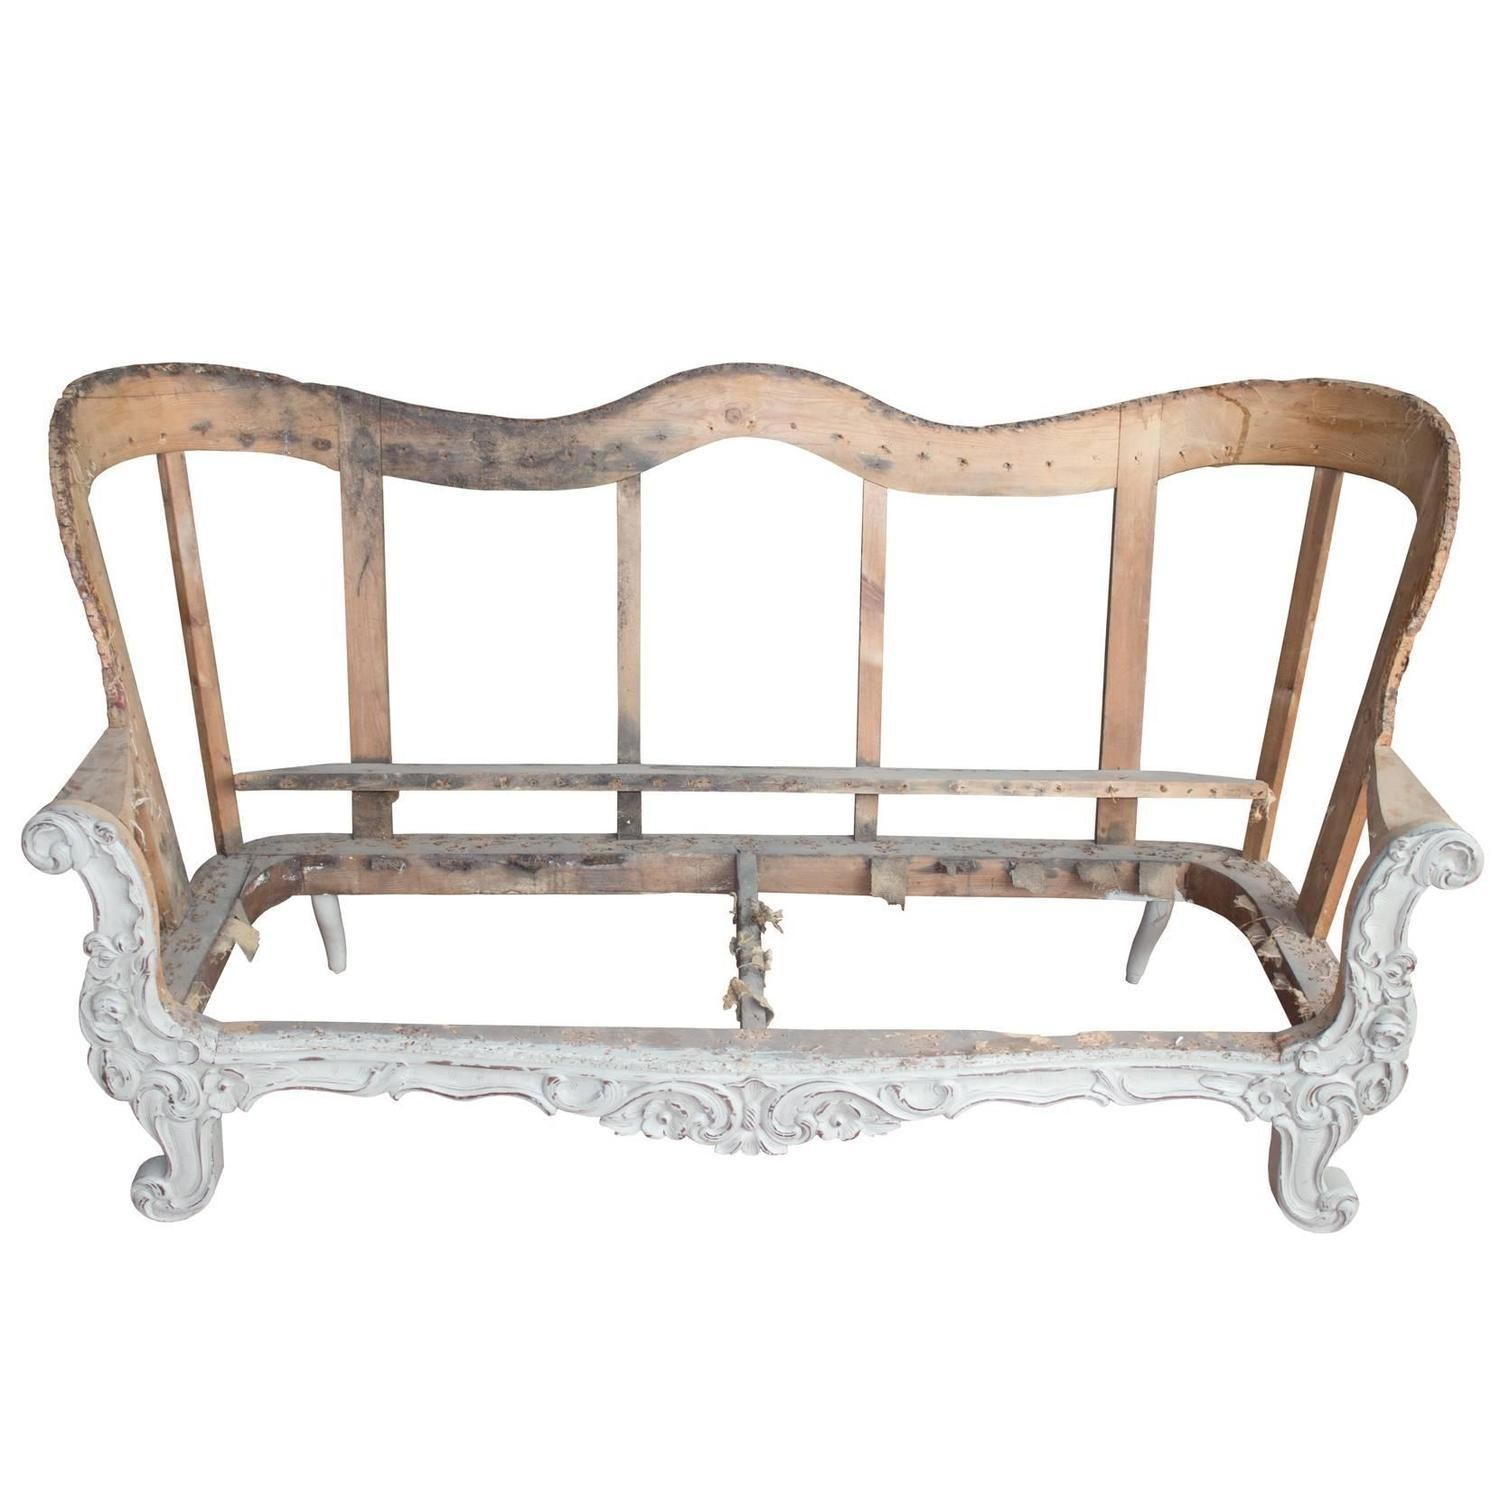 19th Century Carved Wood Sofa Frame At 1stdibs Throughout Carved Wood Sofas (View 12 of 20)